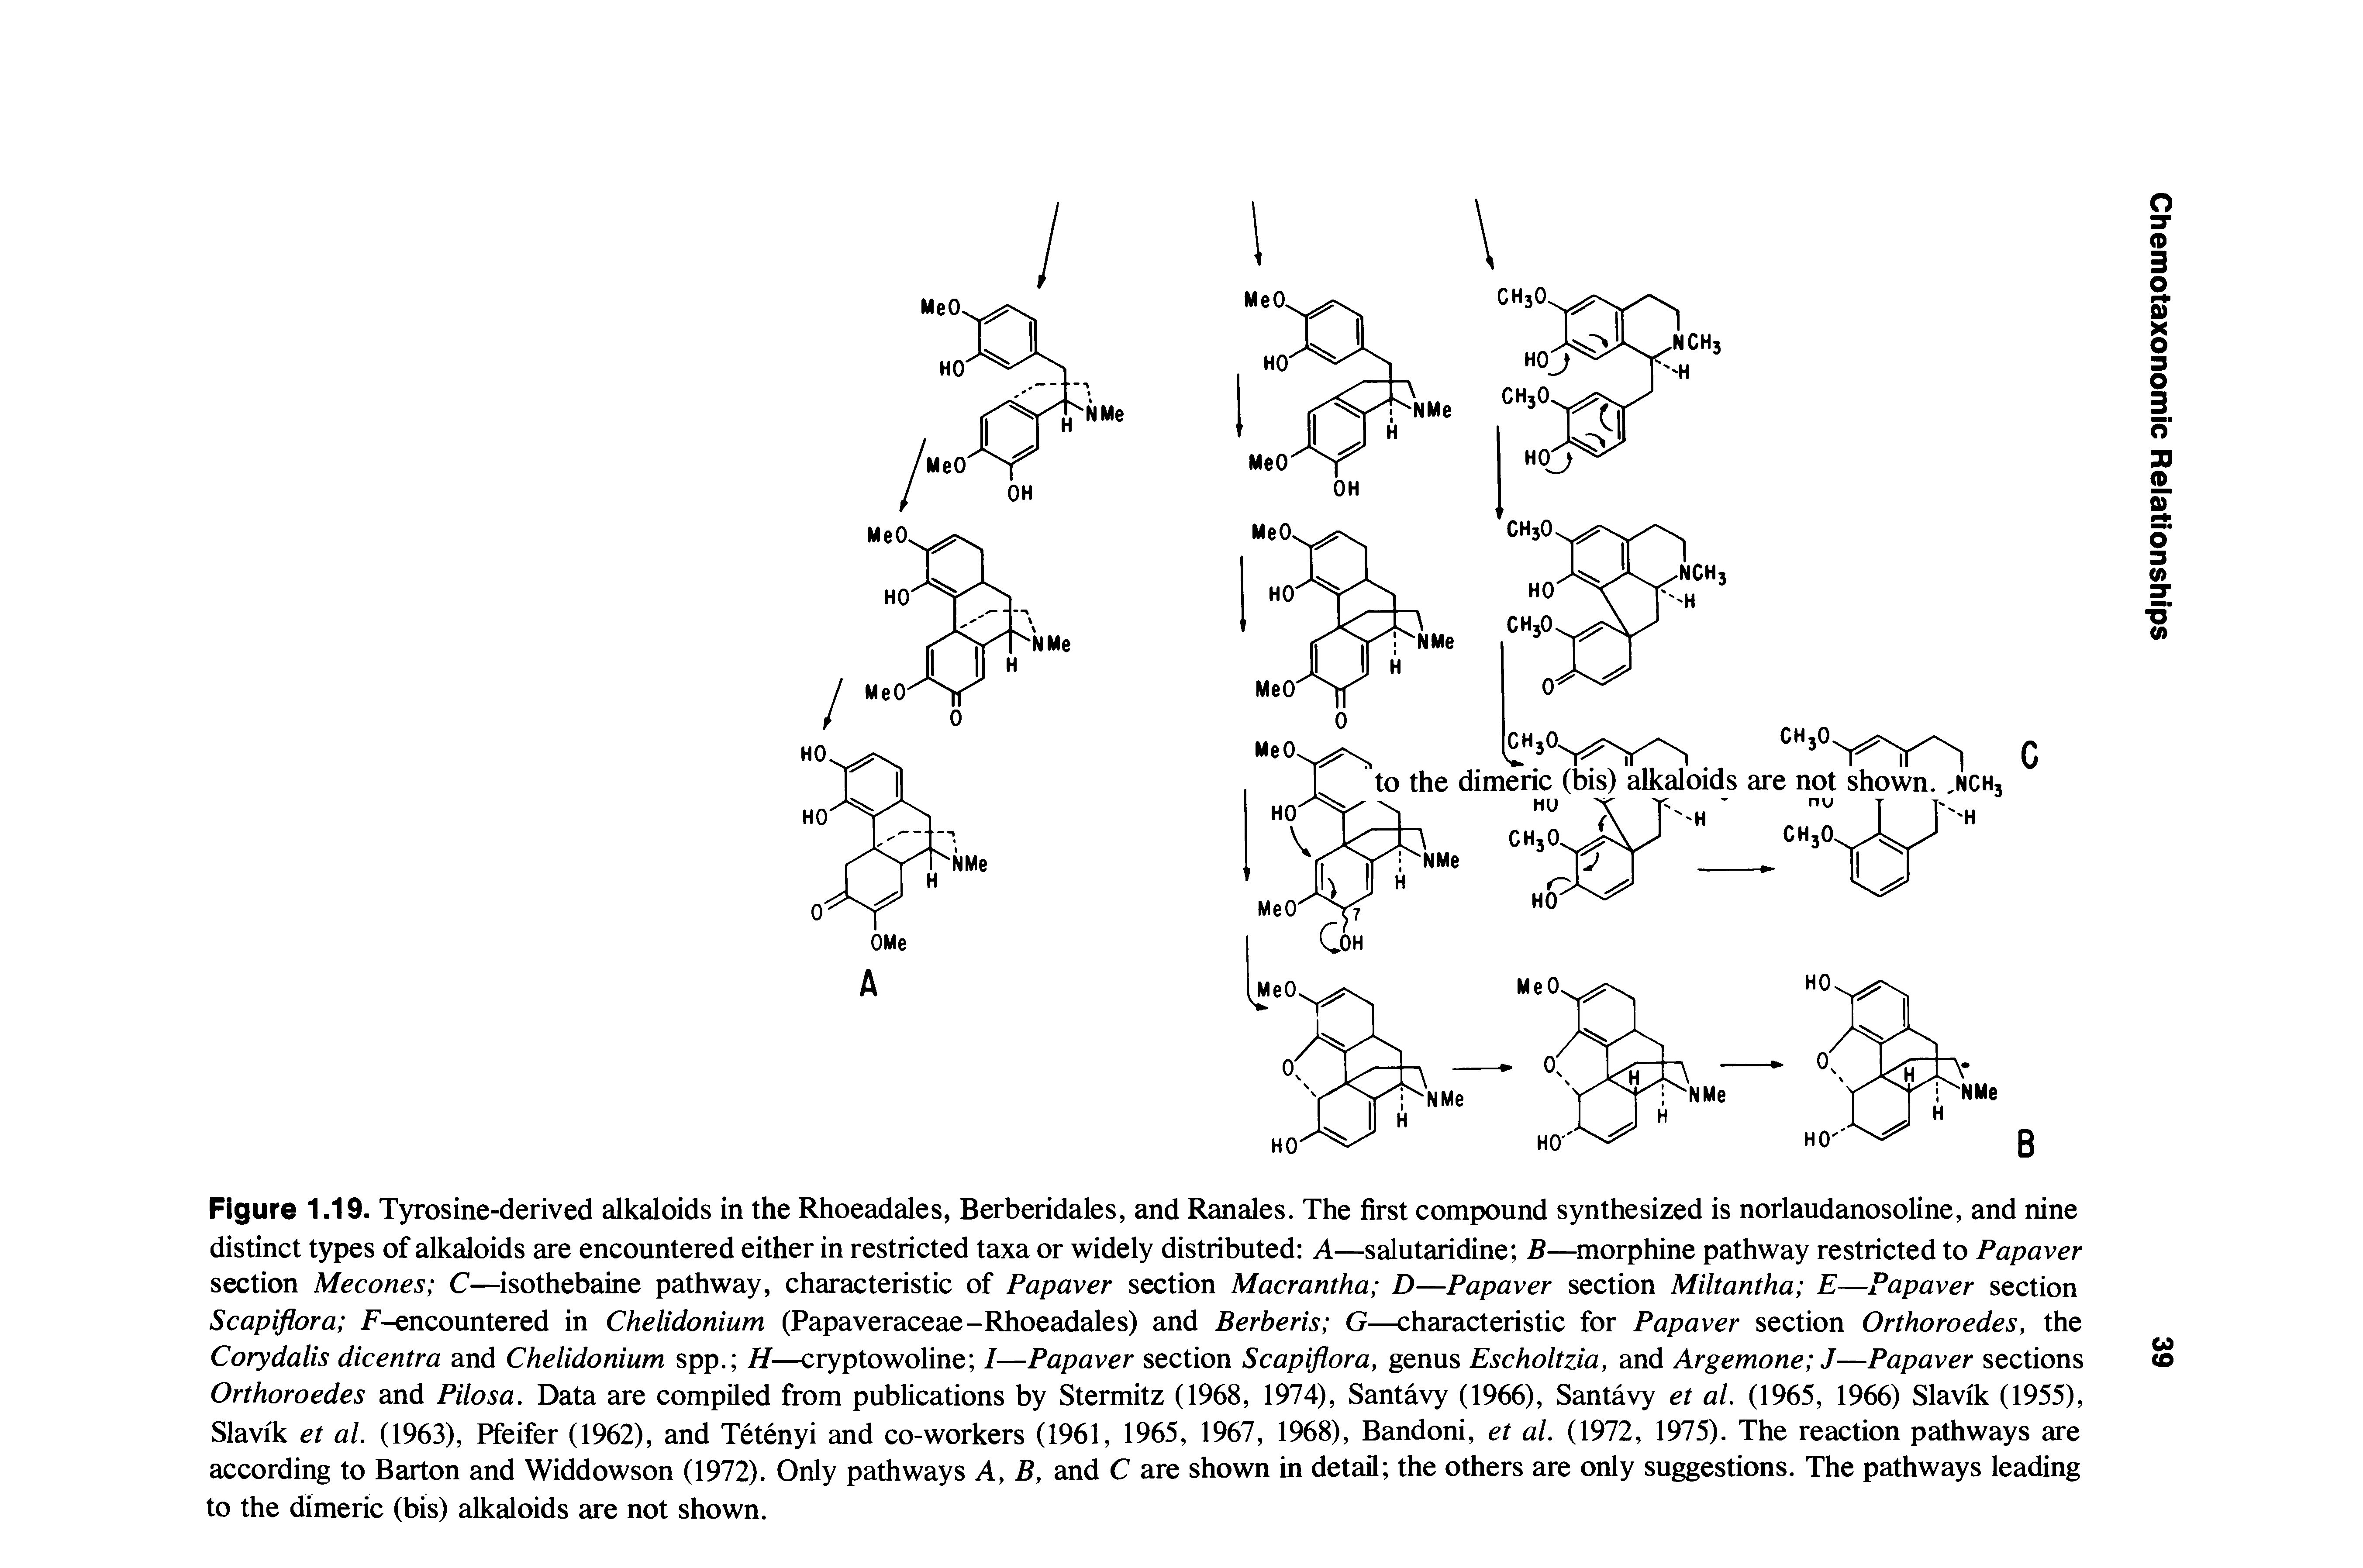 Figure 1.19. Tyrosine-derived alkaloids in the Rhoeadales, Berberidales, and Ranales. The first compound synthesized is norlaudanosoline, and nine distinct types of alkaloids are encountered either in restricted taxa or widely distributed A—salutaridine B— morphine pathway restricted to Papaver section Mecones C—isothebaine pathway, characteristic of Papaver section Macrantha D—Papaver section Miltantha E—Papaver section Scapiflora F-encountered in Chelidonium (Papaveraceae-Rhoeadales) and Berberis G—characteristic for Papaver section Orthoroedes, the Corydalis dicentra and Chelidonium spp. H—cryptowoline I—Papaver section Scapiflora, genus Escholtzia, and Argemone J—Papaver sections Orthoroedes and Pilosa, Data are compiled from publications by Stermitz (1968, 1974), Santavy (1966), Santavy et al. (1965, 1966) Slavik (1955), Slavik et al. (1963), Pfeifer (1962), and Tetenyi and co-workers (1961, 1965, 1967, 1968), Bandoni, et al. (1972, 1975). The reaction pathways are according to Barton and Widdowson (1972). Only pathways A, B, and C are shown in detail the others are only suggestions. The pathways leading to the dimeric (bis) alkaloids are not shown.